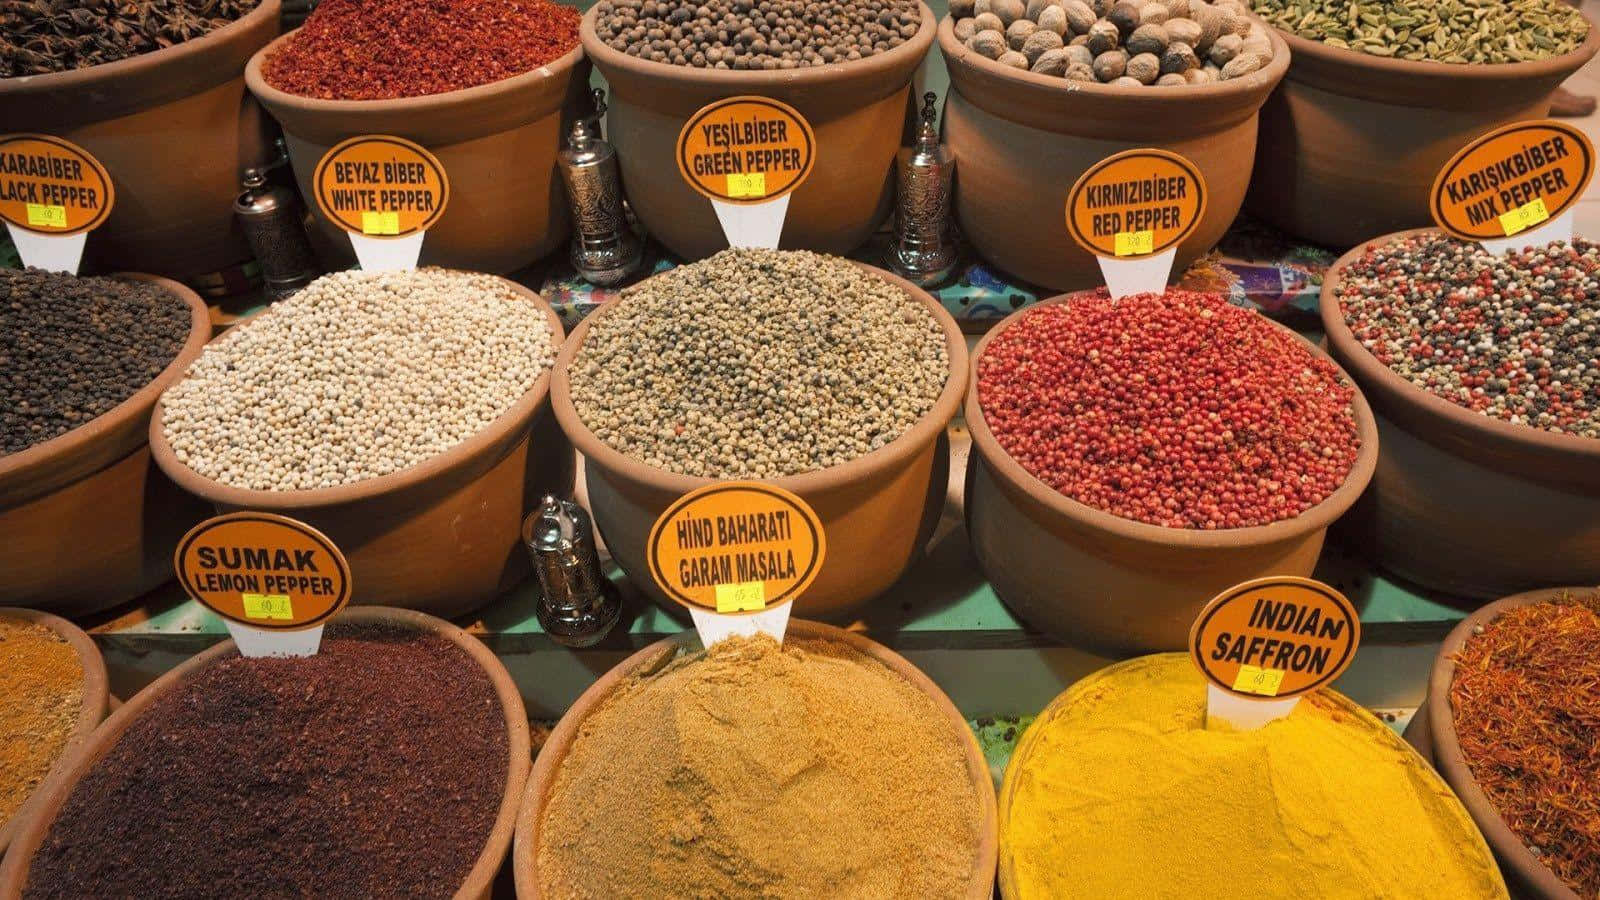 A Variety of Spices to Spice Up Any Meal